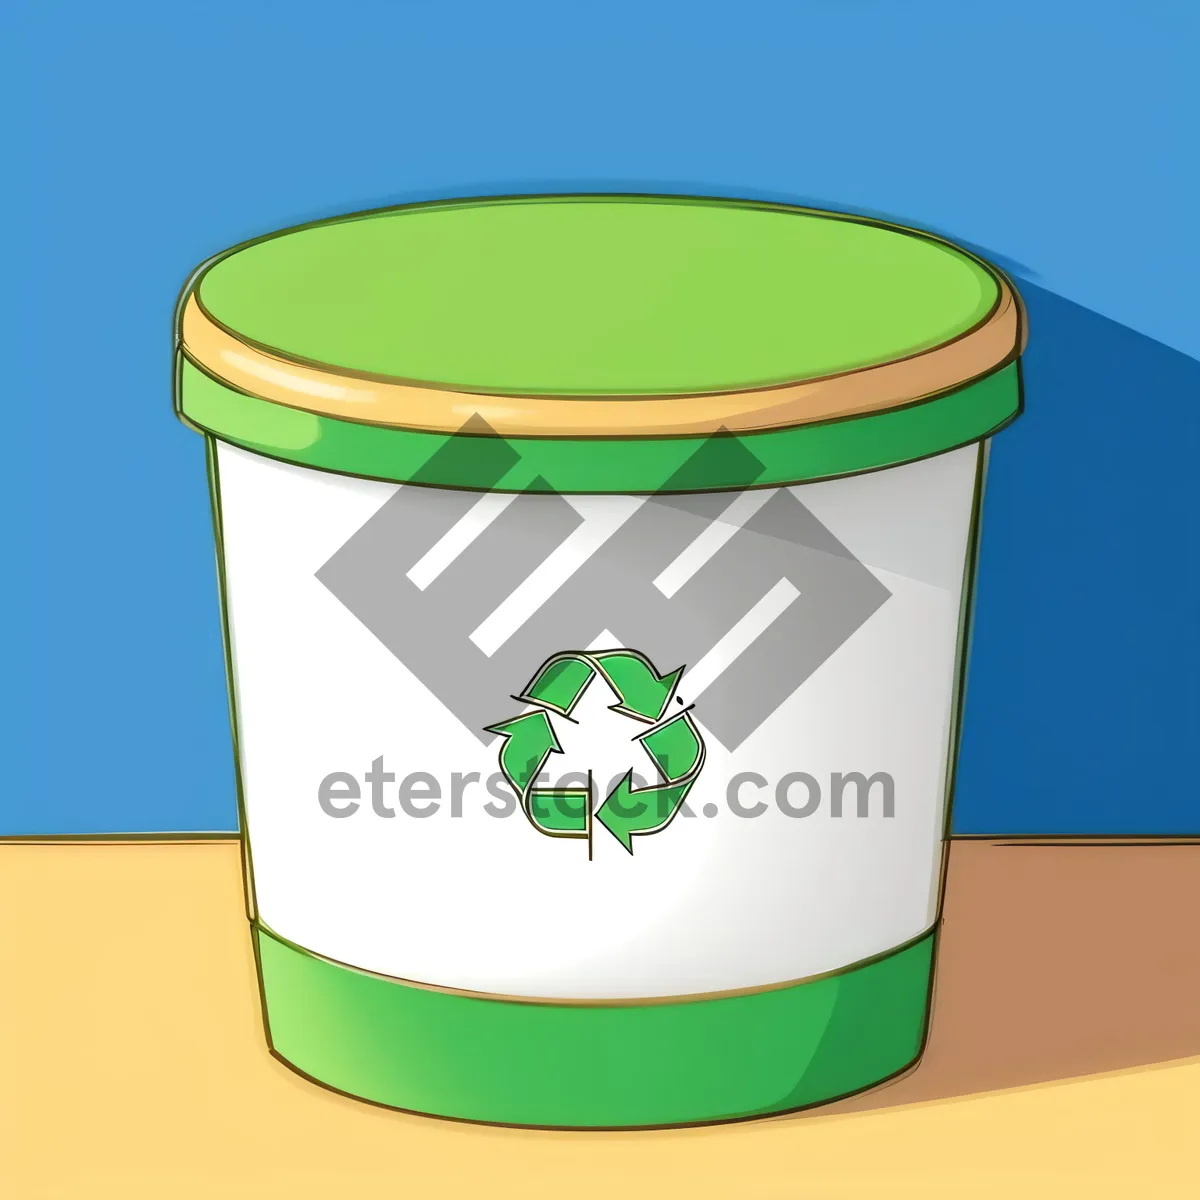 Picture of Plastic Beverage Cup - Empty Vessel for Refreshing Drinks